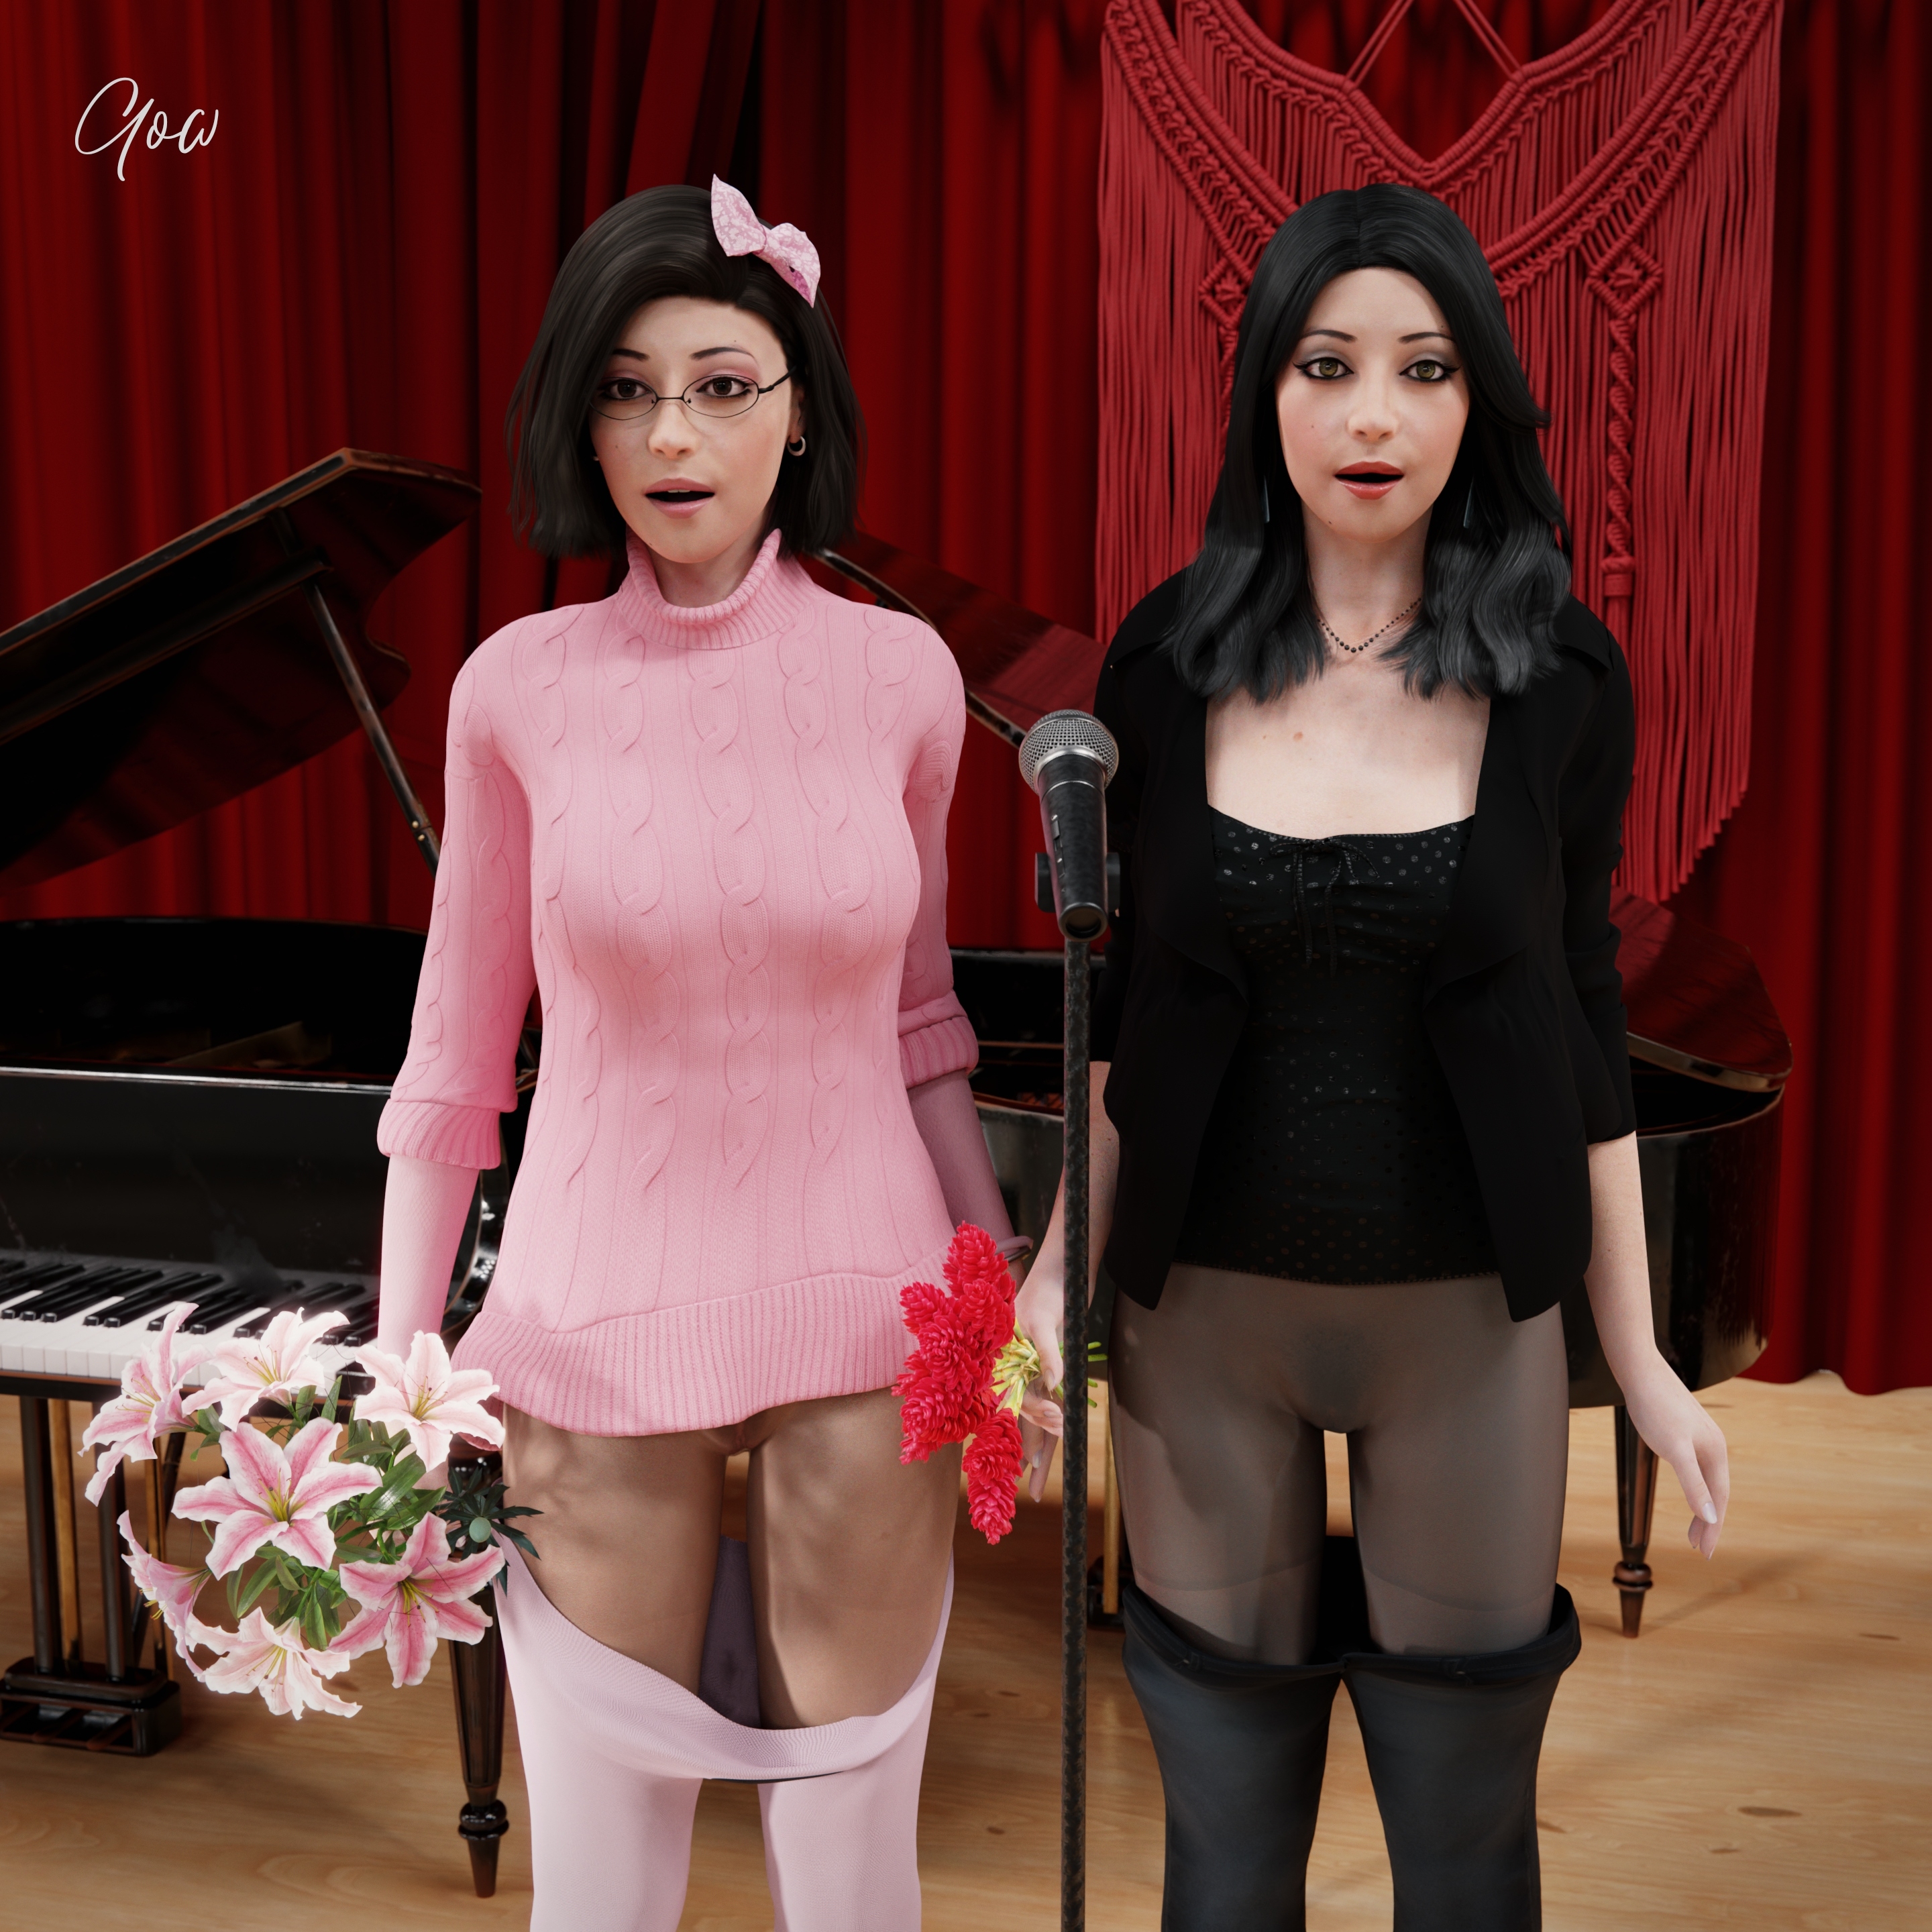 The Great Magician pt1 (Rona and Tiffany)  White Ballerina 3dnsfw Pantyhose Nylon Photorealistic Cosplay Partially_clothed Clothed Clothed/nude Clothing Wet Pussy No Panties Hairy Pussy Milf 3d Girl Sisters Brunette Shoes Party Dress Dress Night Dress Original Character See Through 4